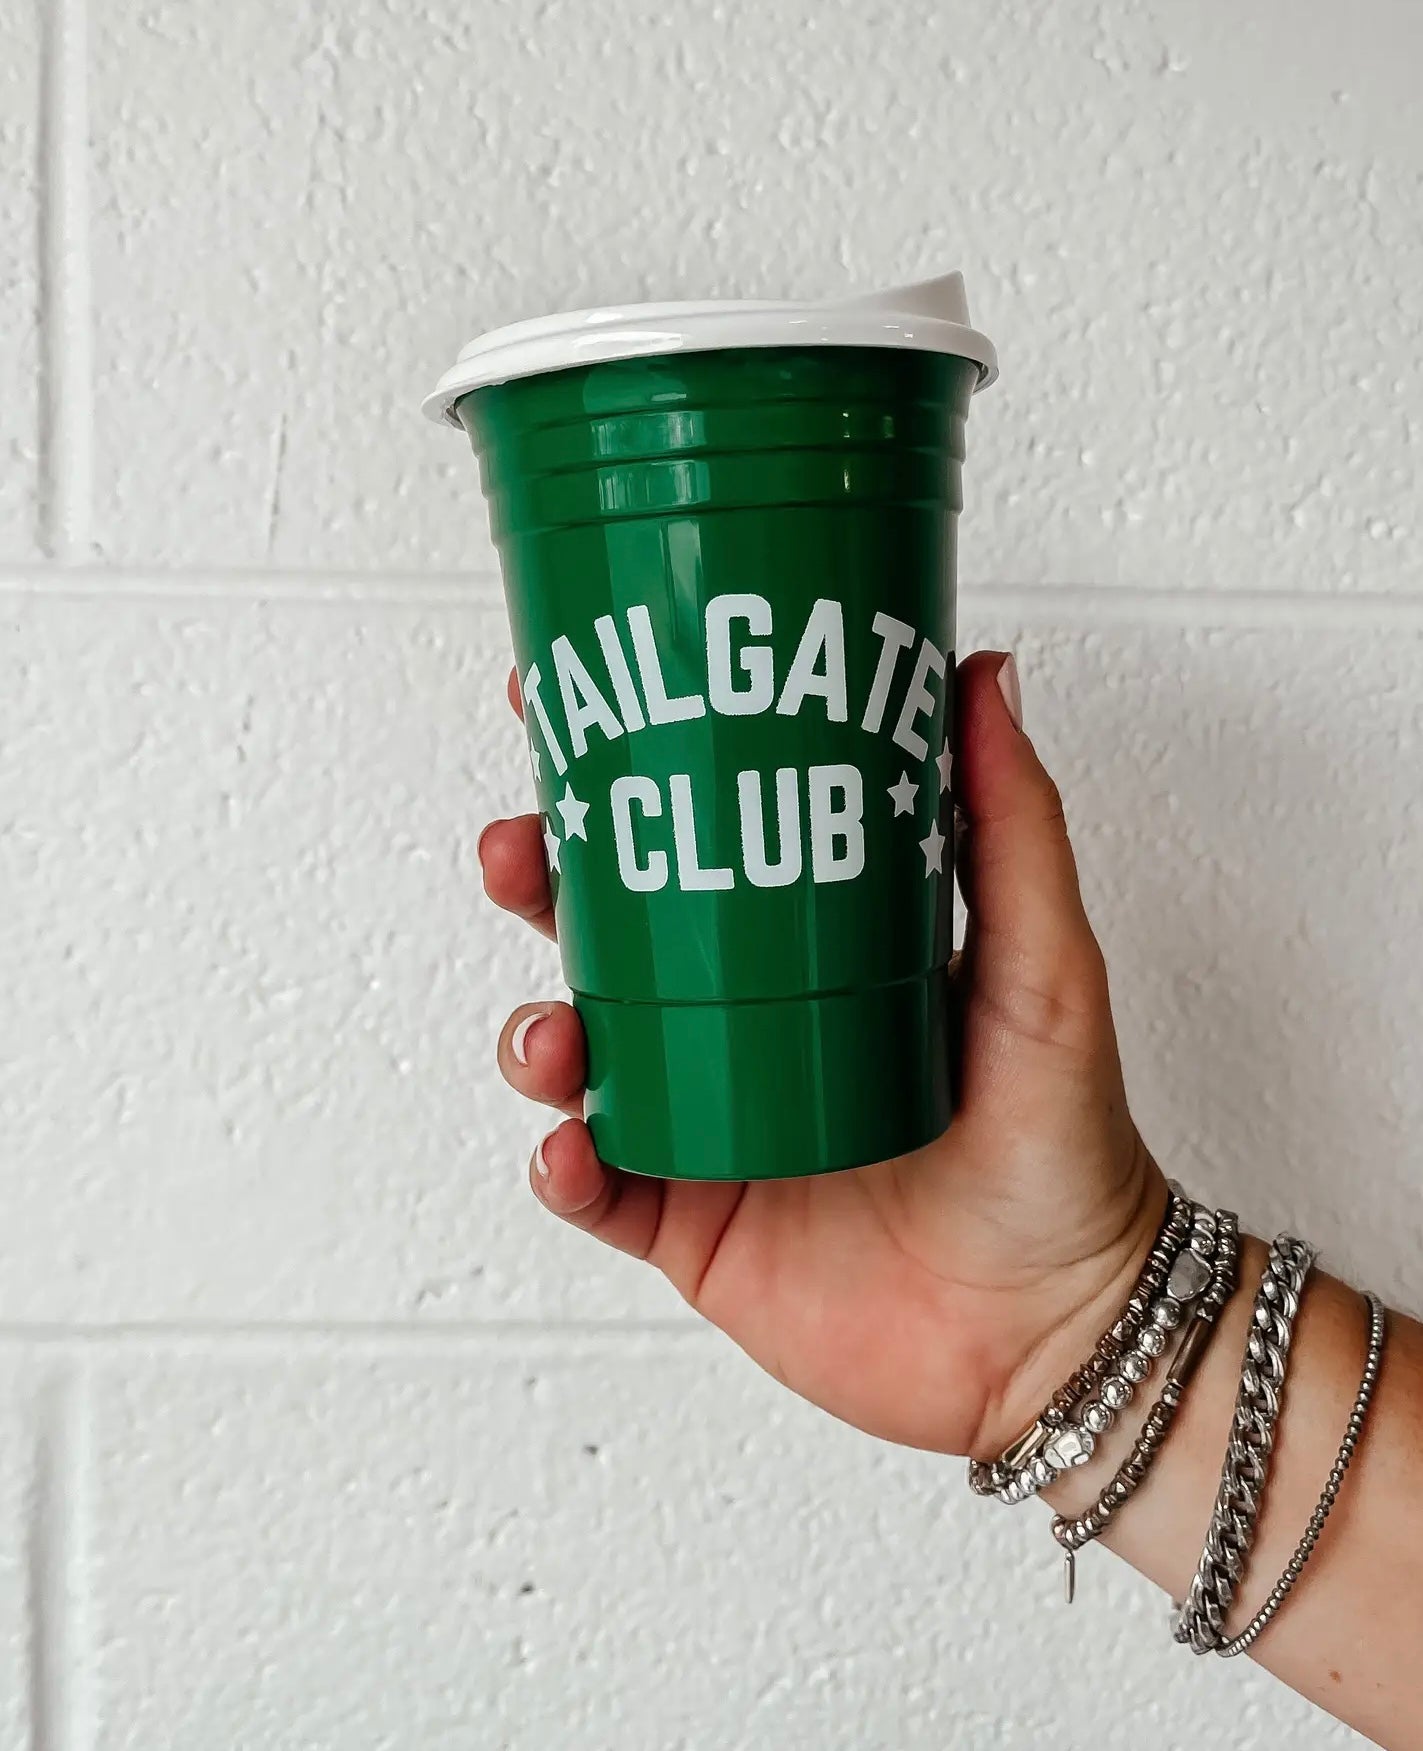 Tailgate Club Reusable Cup